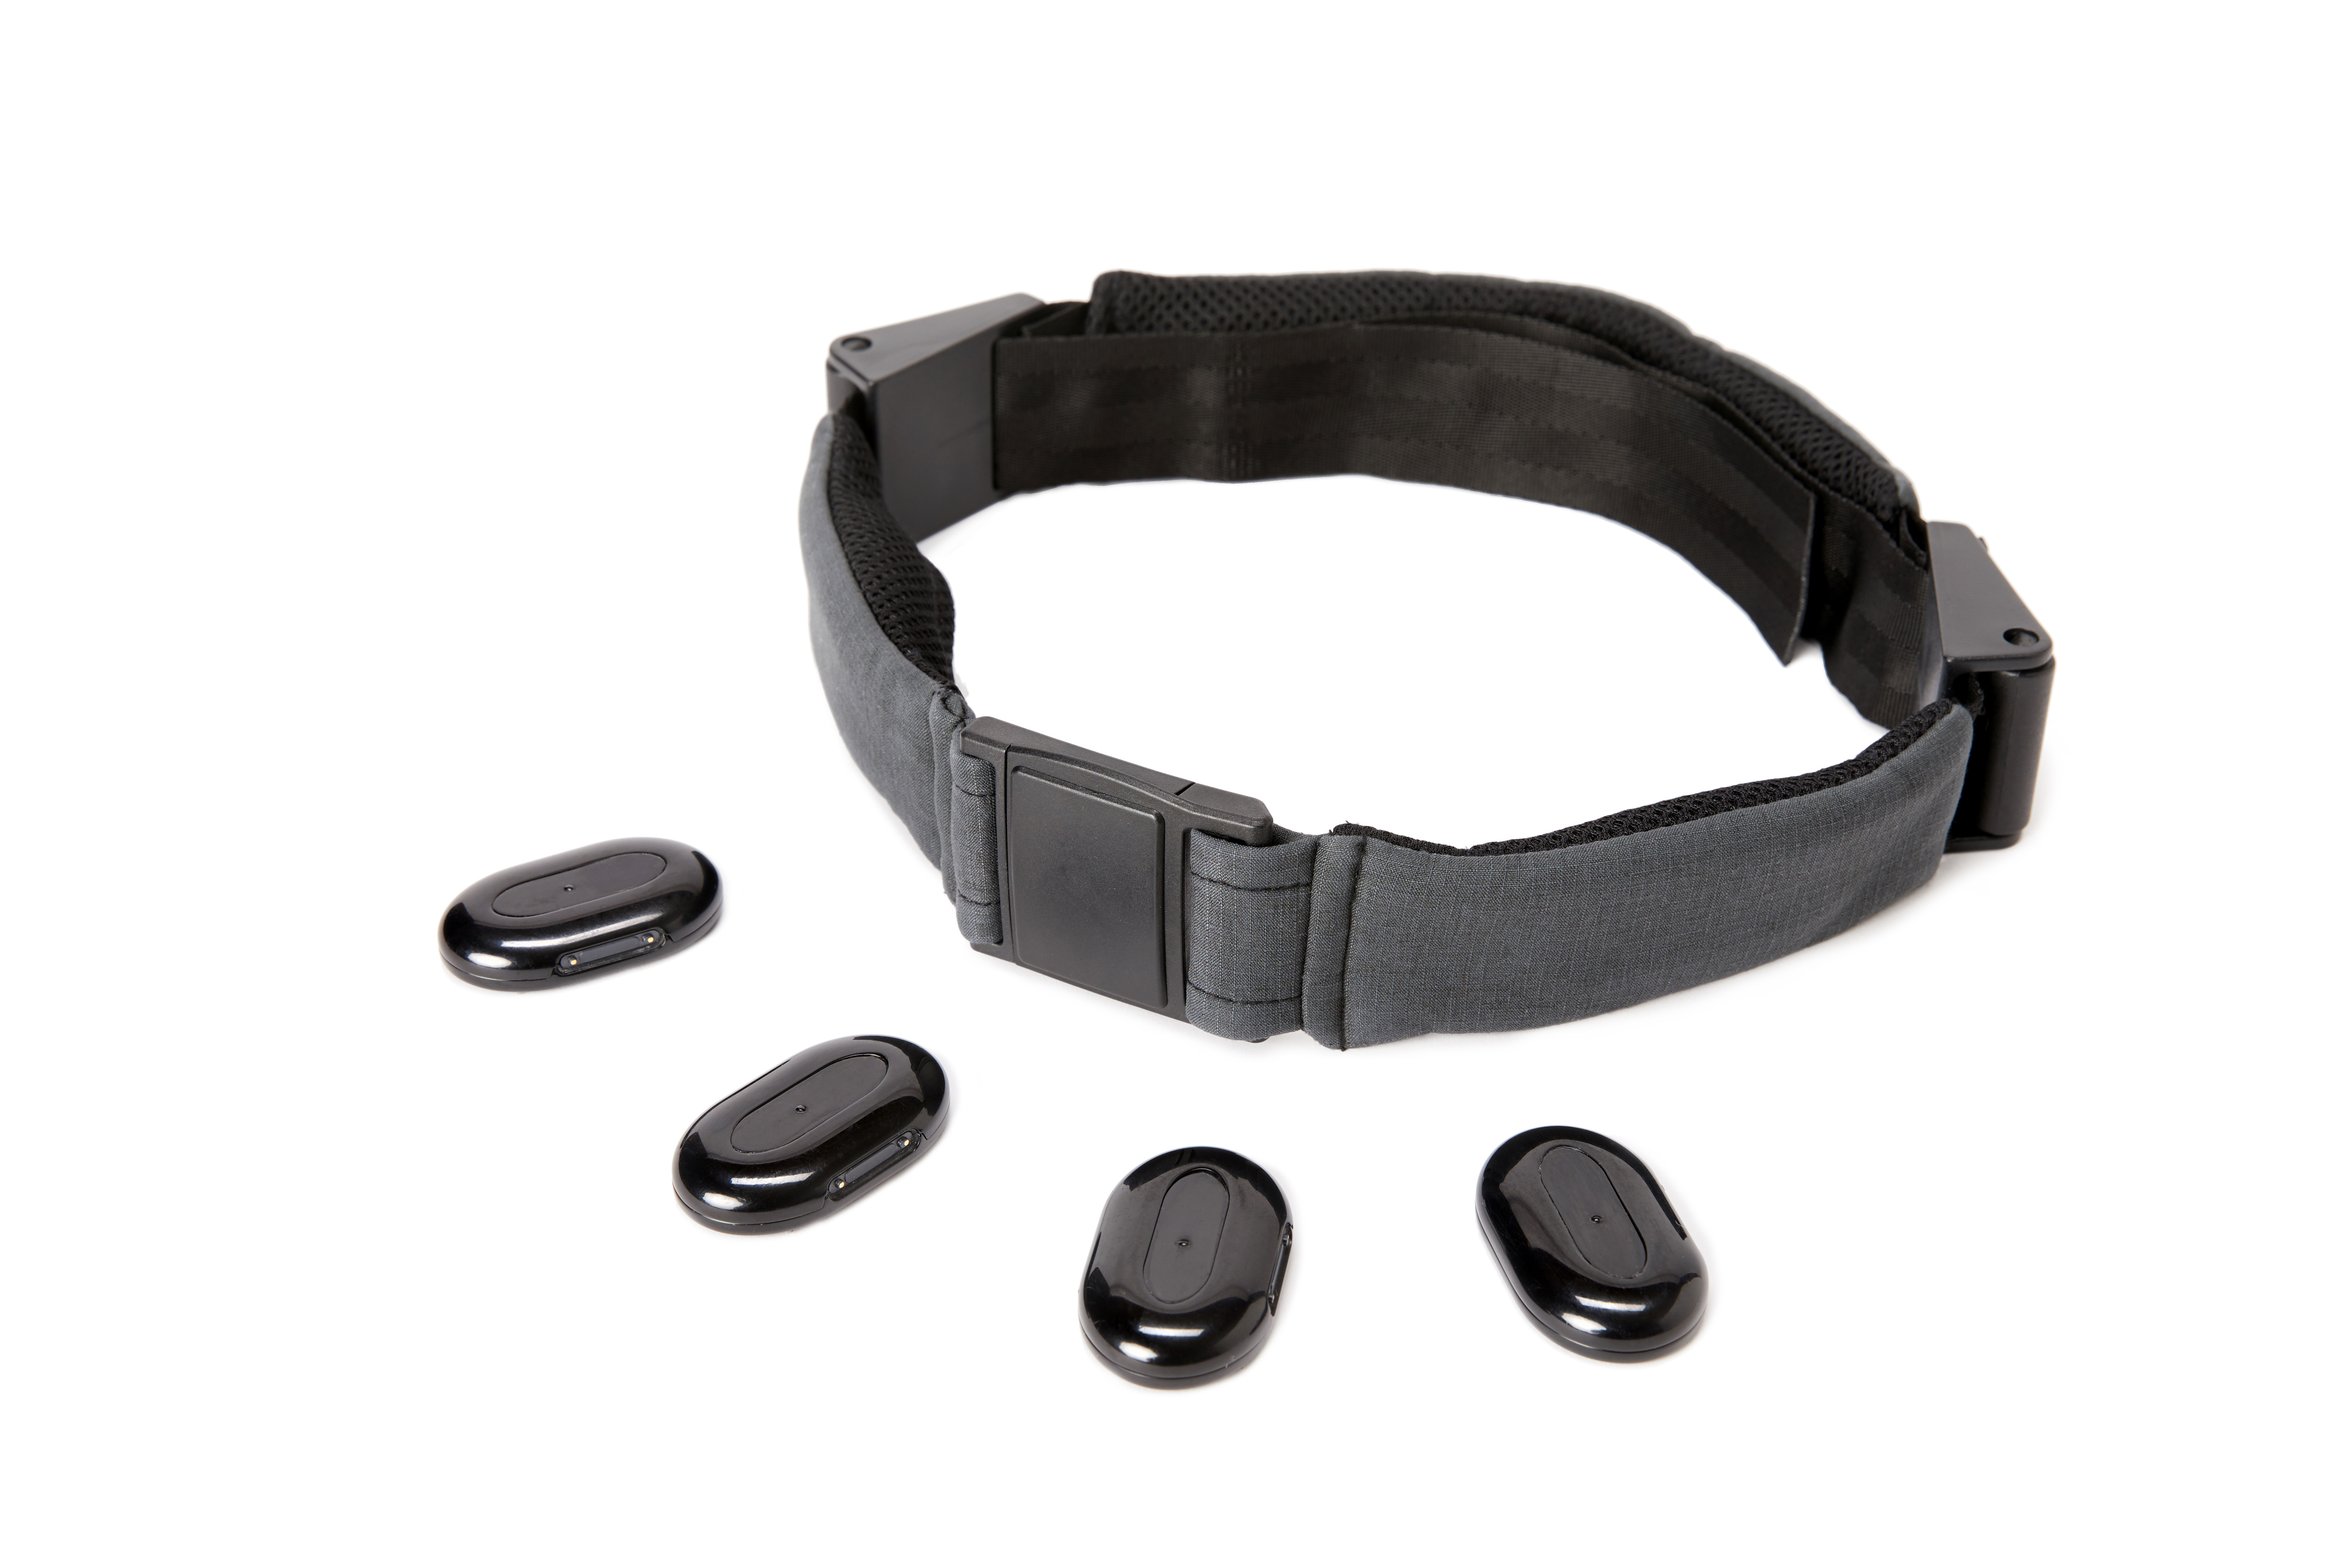 The wearable technology system includes adhesive, haptic-enabled Stones, the BassBelt, and a mobile app.